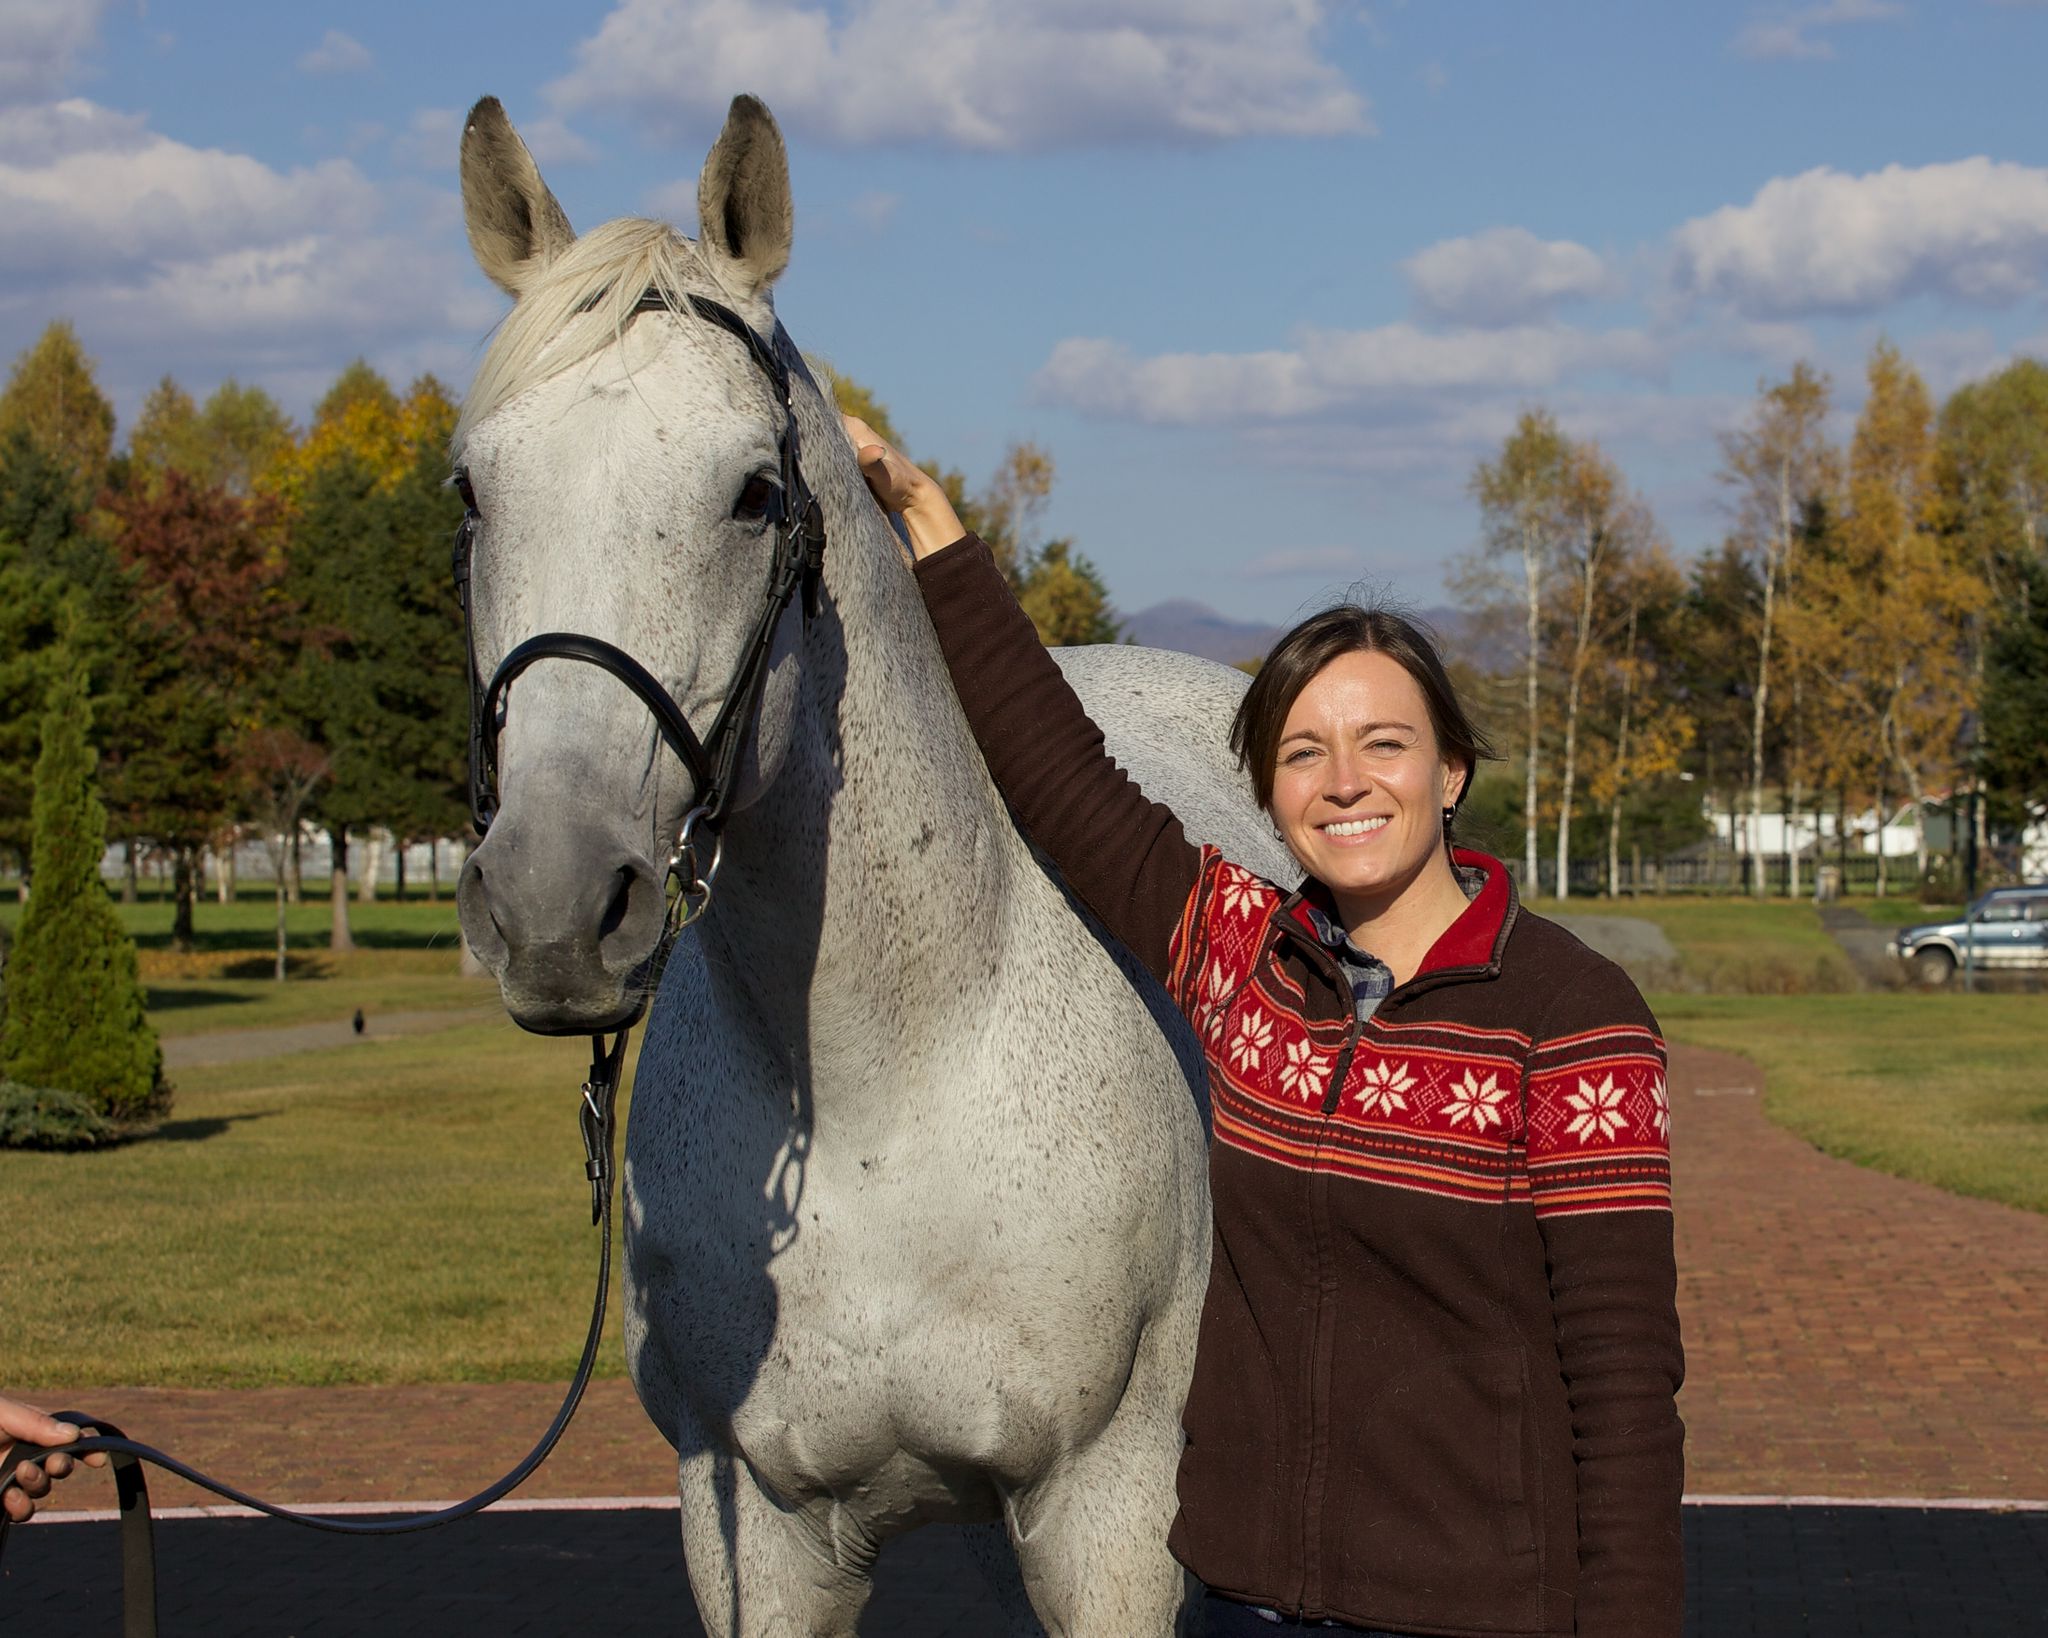 Meeting your heroes (2): Kate Hunter with her favorite horse Silver Charm on a visit to Hokkaido. Photo supplied